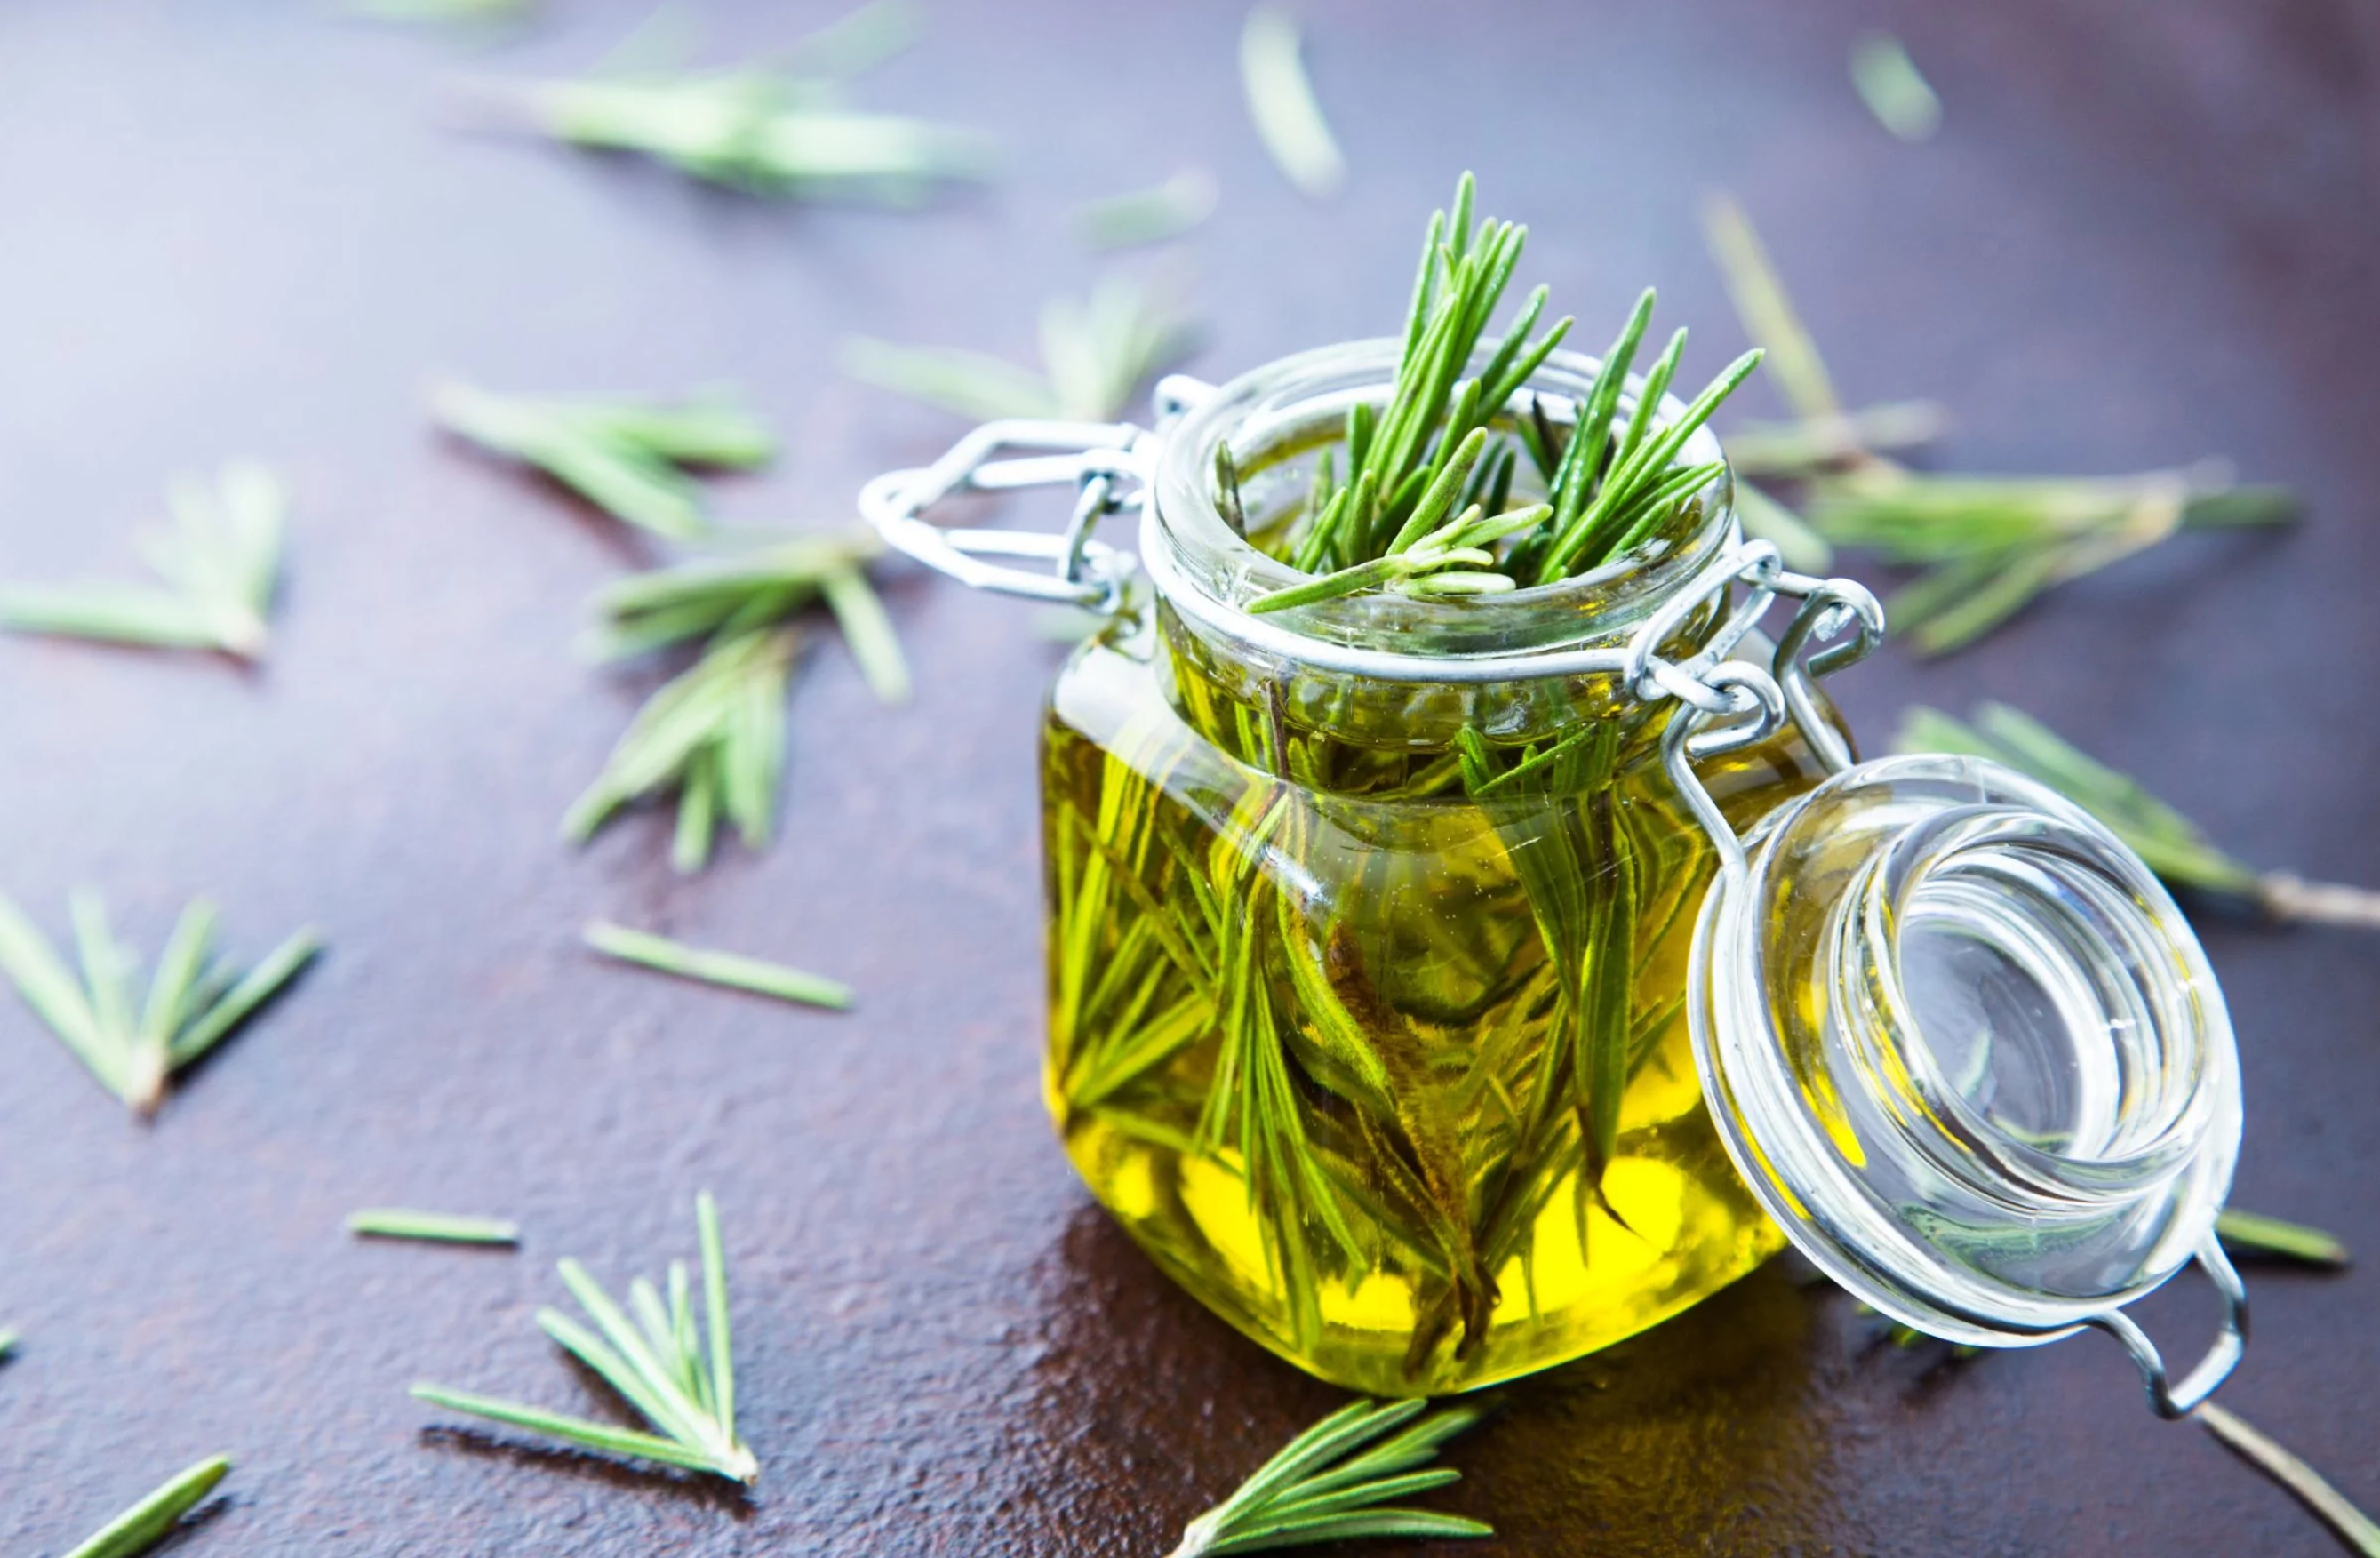 How to Make Rosemary Essential Oil — Step-by-Step Guide